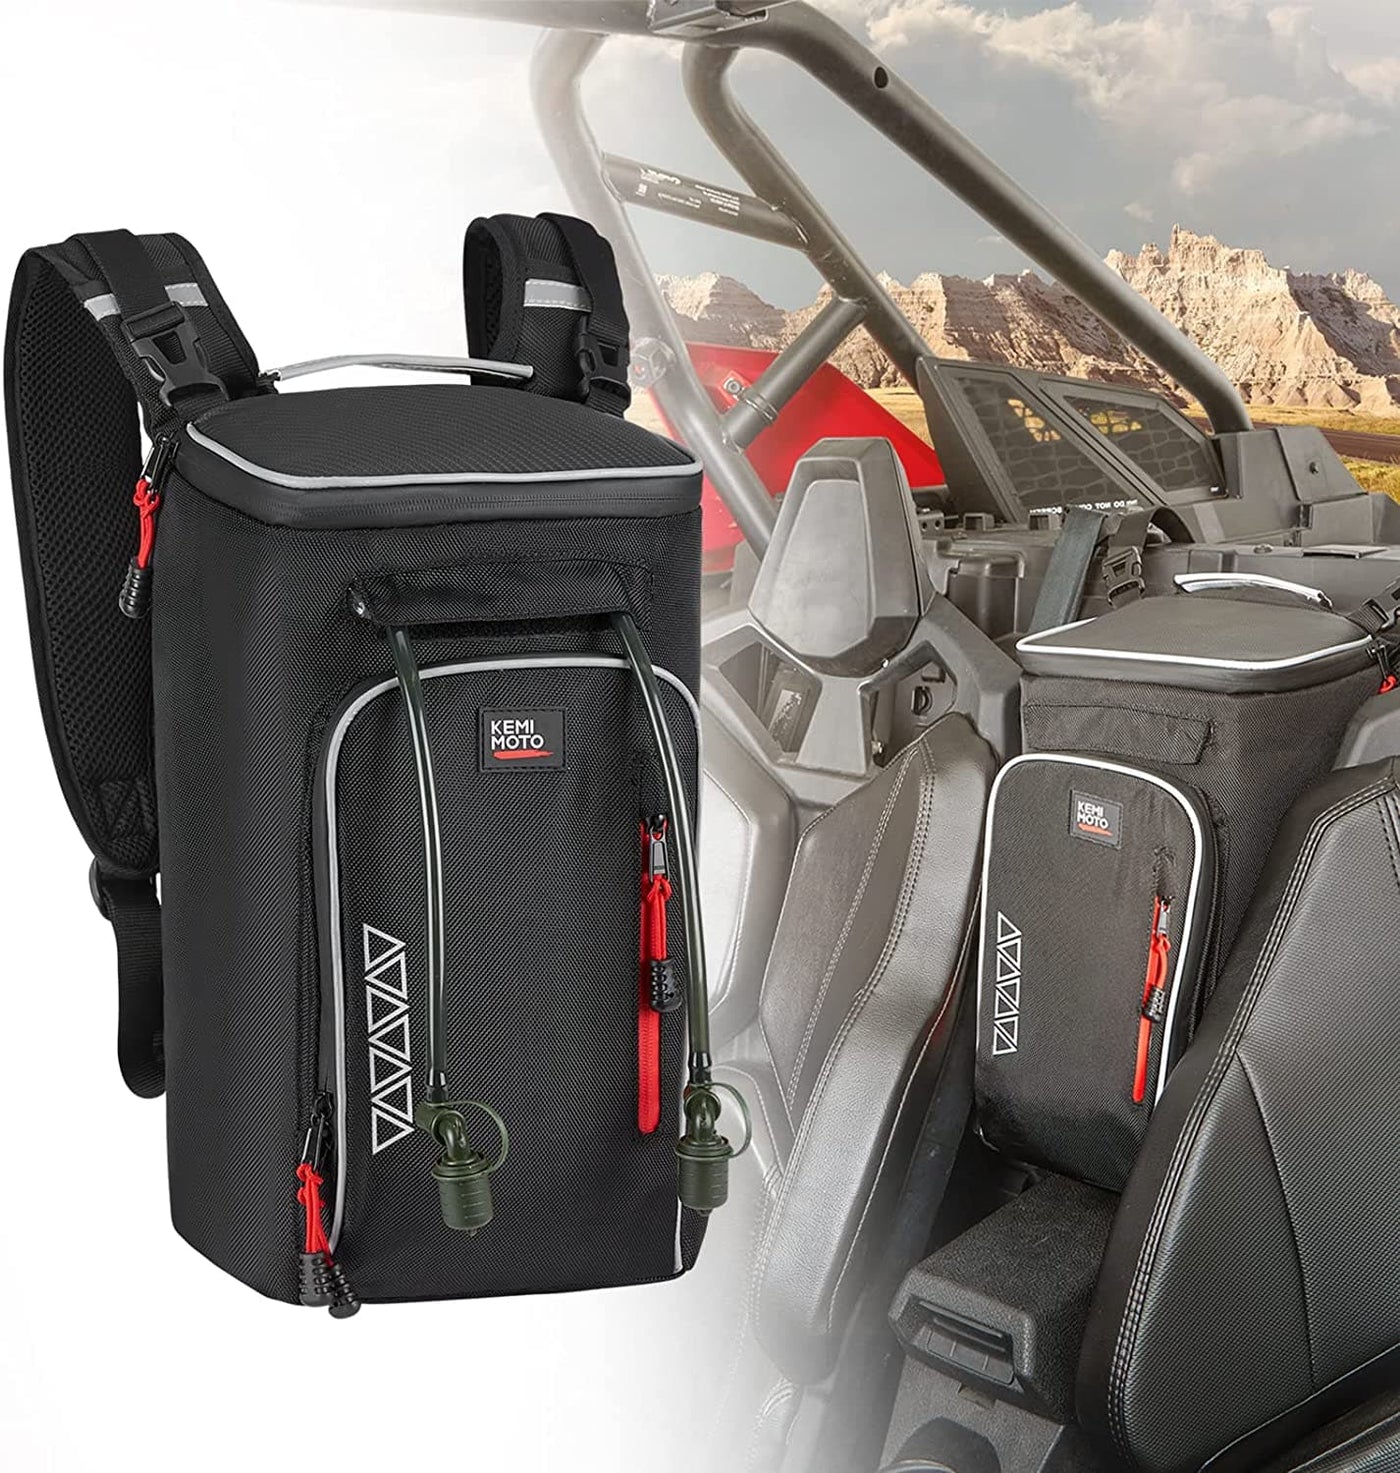 Updated Storage / Cargo Bag with Two Hydration Backpacks for 2020-2022 RZR PRO XP/4 - KEMIMOTO